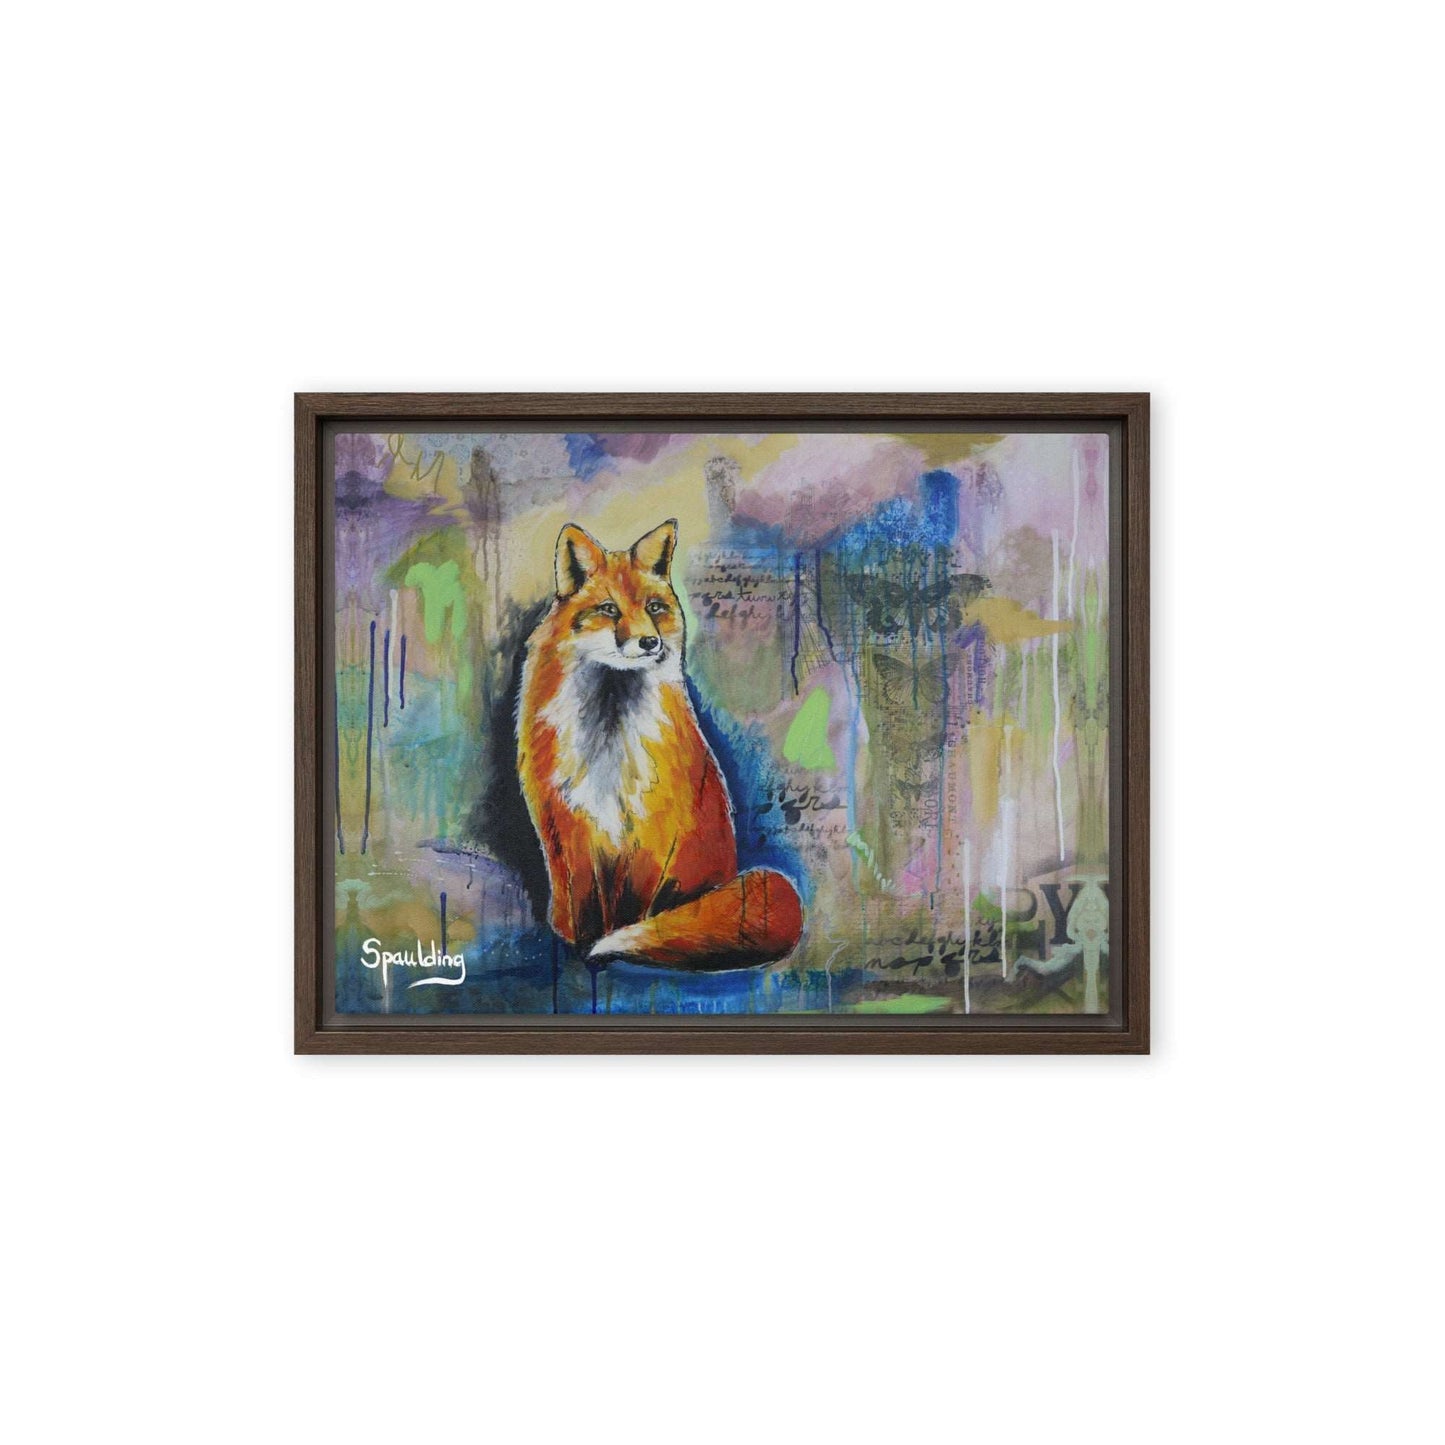 A framed canvas print of a red fox with a bushy tail sitting on a wall, surrounded by blue, green, and pink colors.